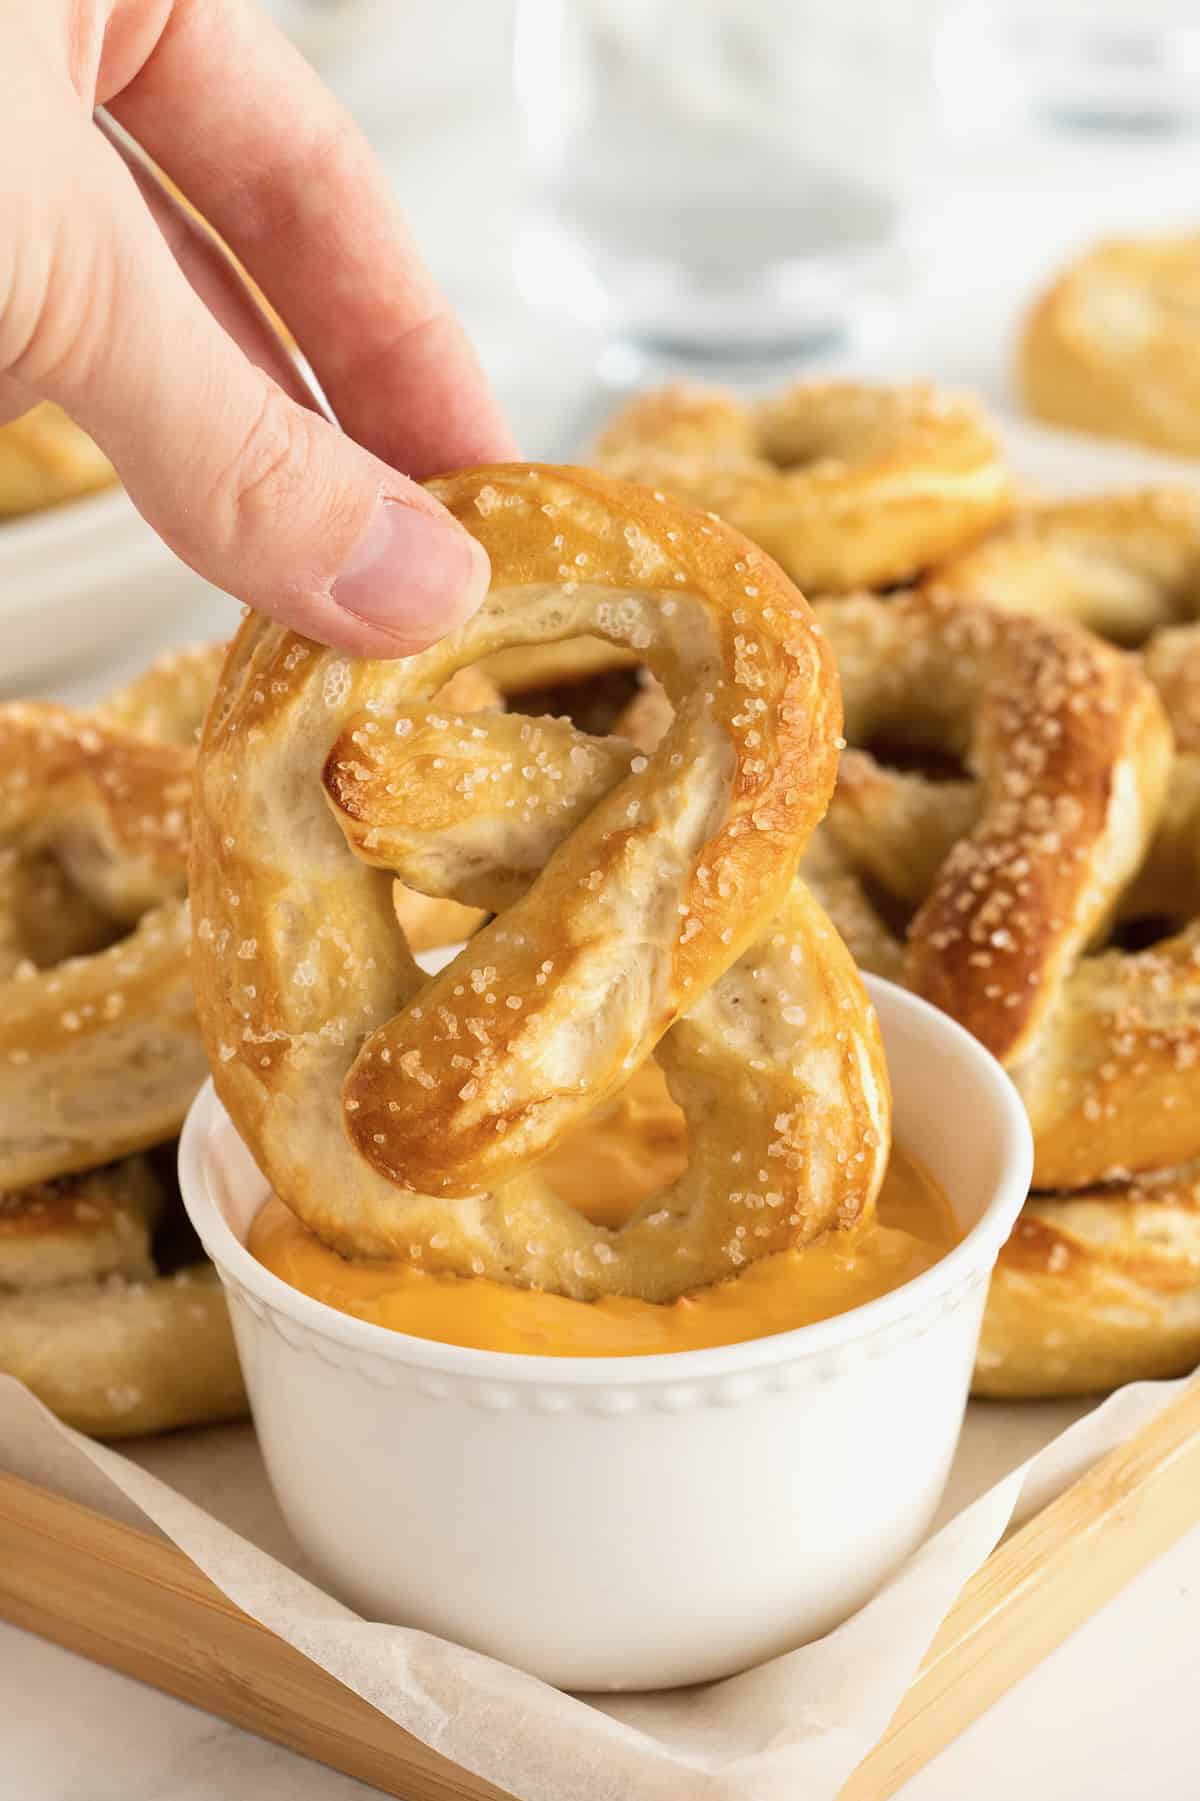 A hand dipping a soft pretzel into cheese sauce.